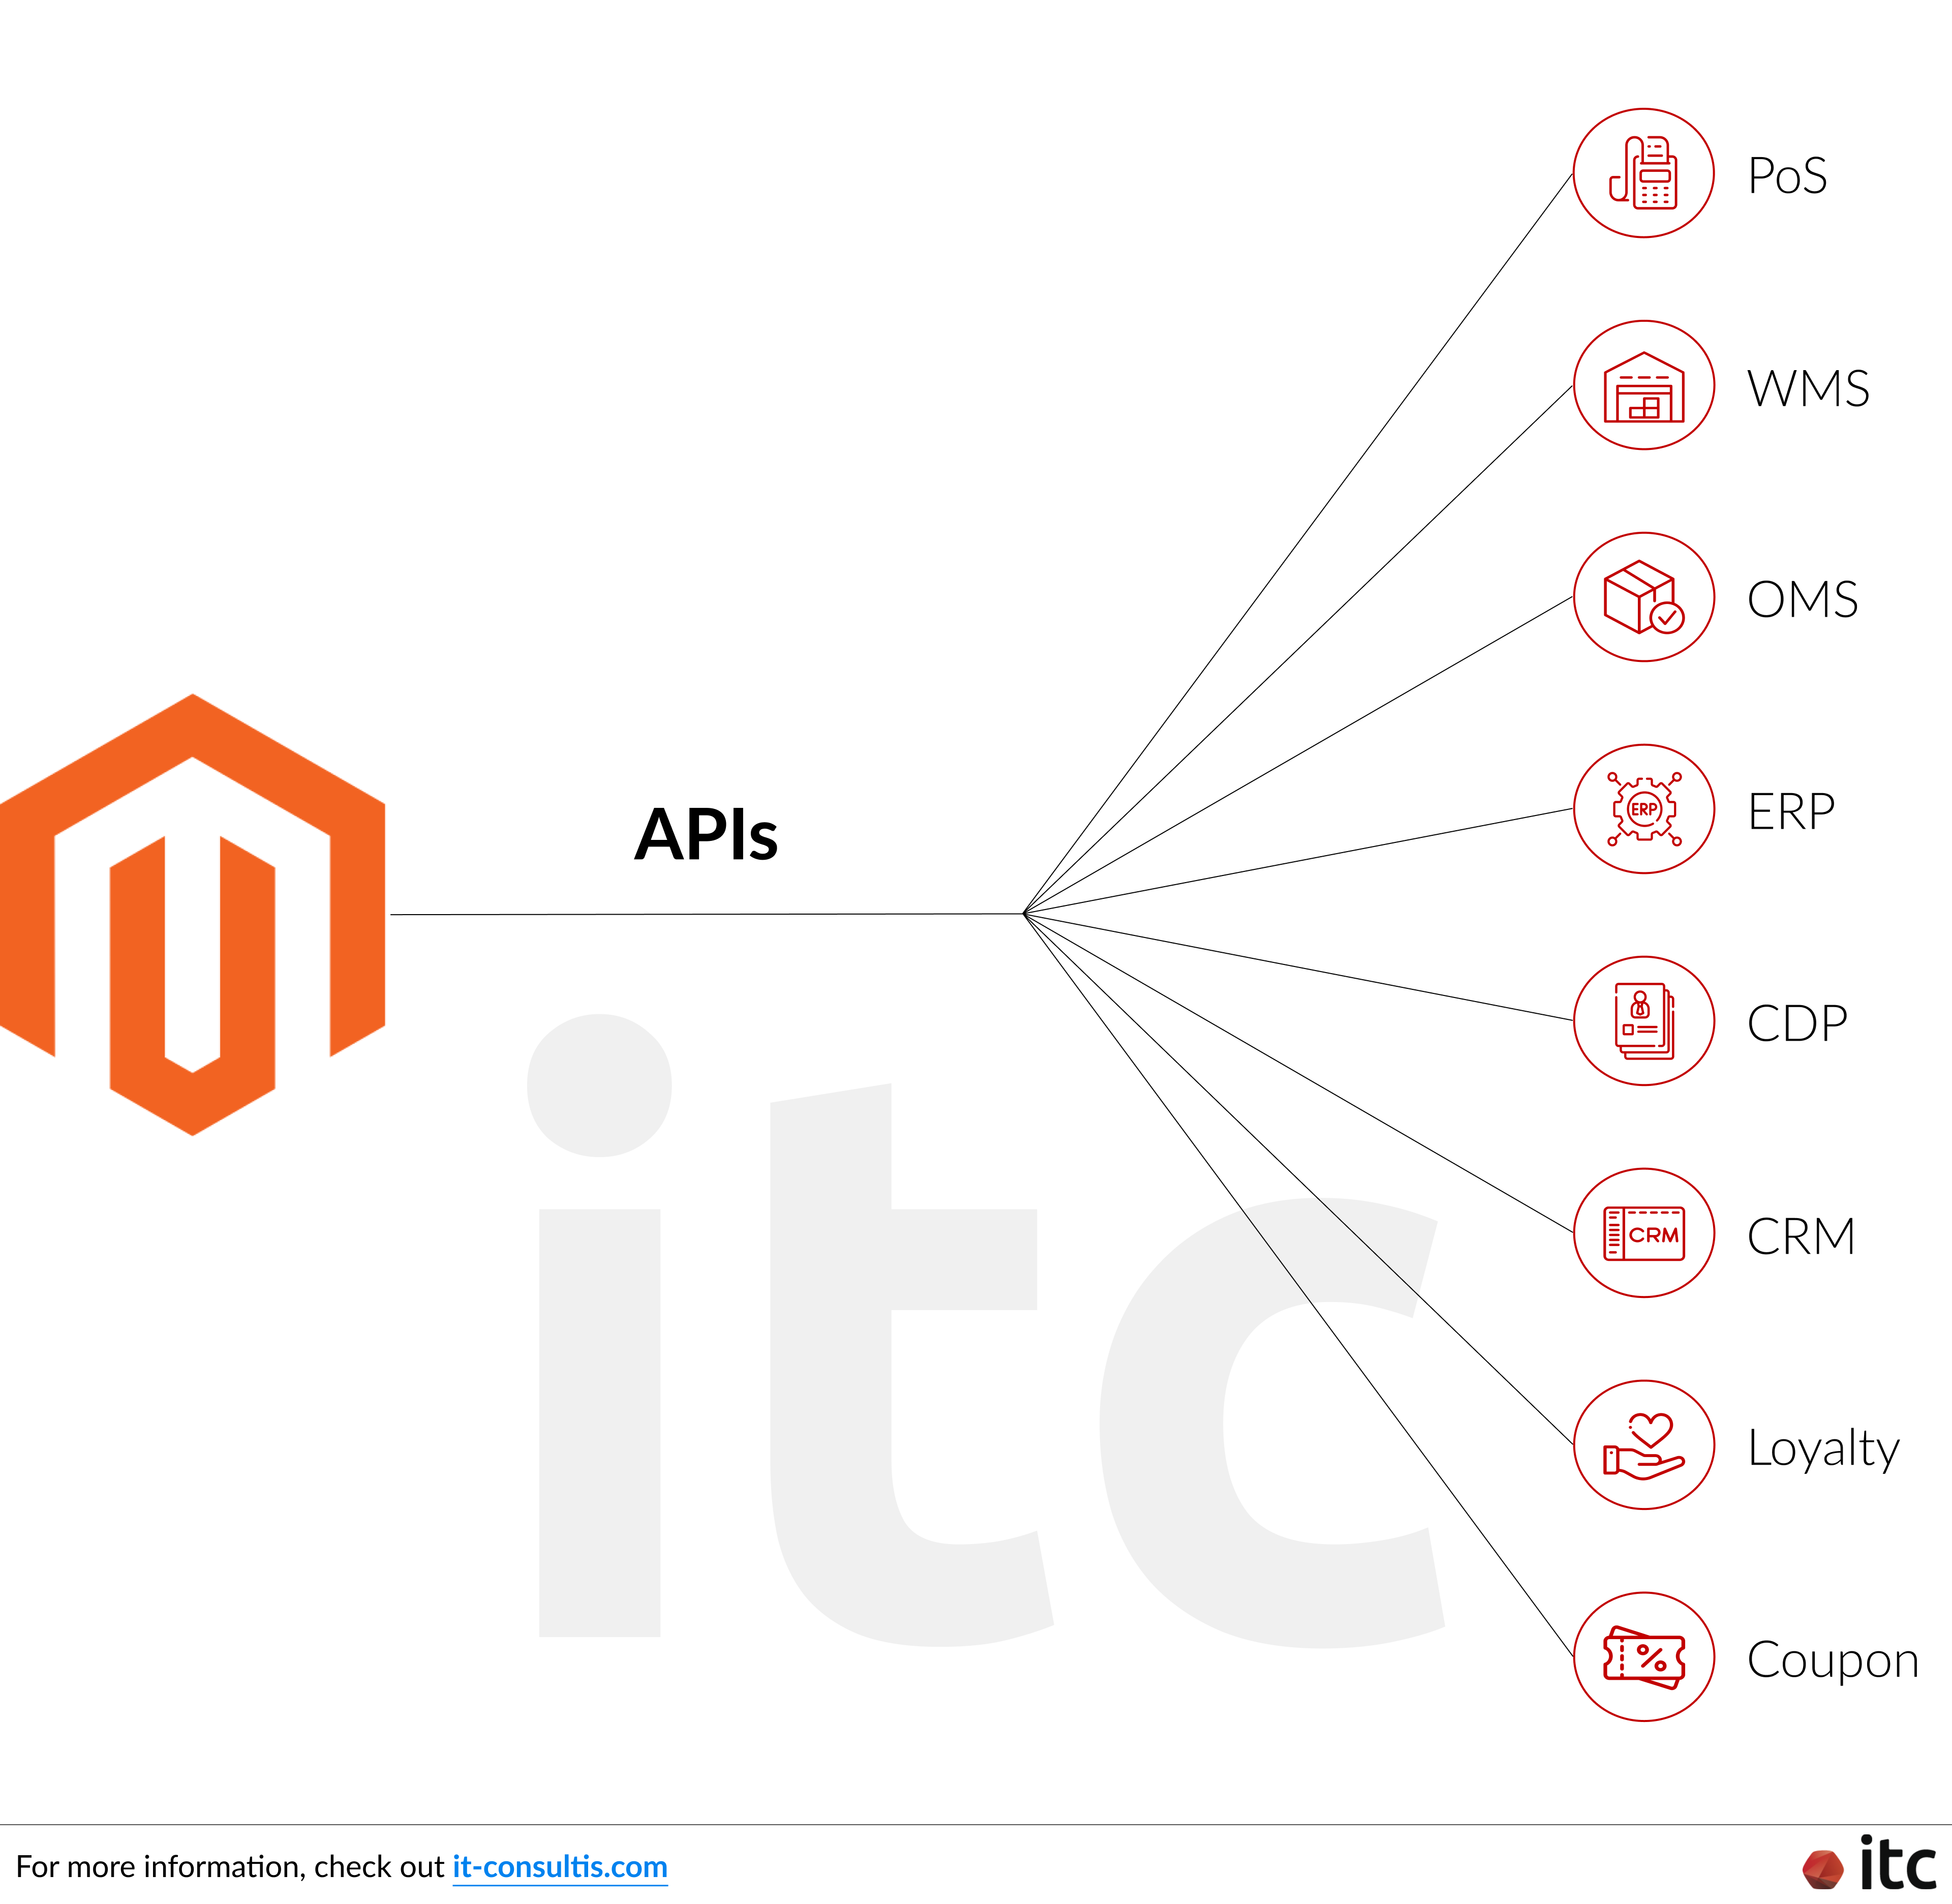 Connect the Magento backend with all your business systems in China, including the OMS, CRM, ERP, WMS, POS, CDP, Loyalty system, coupons, Logistics, Payment, etc.